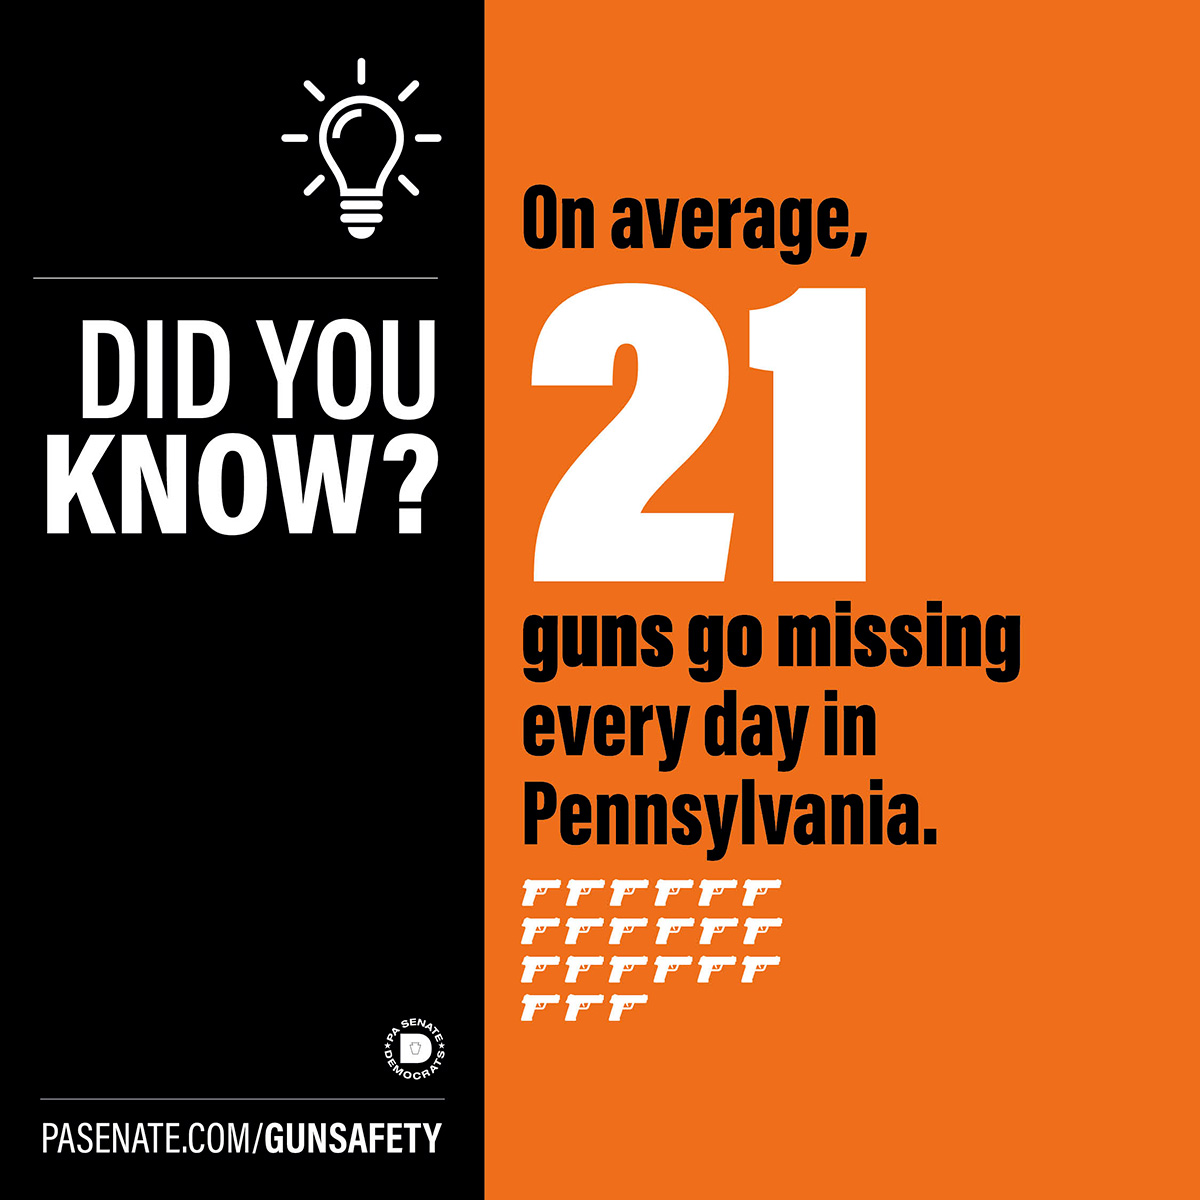 Did you know? Did you know? On average, 21 guns go missing everyday in PA